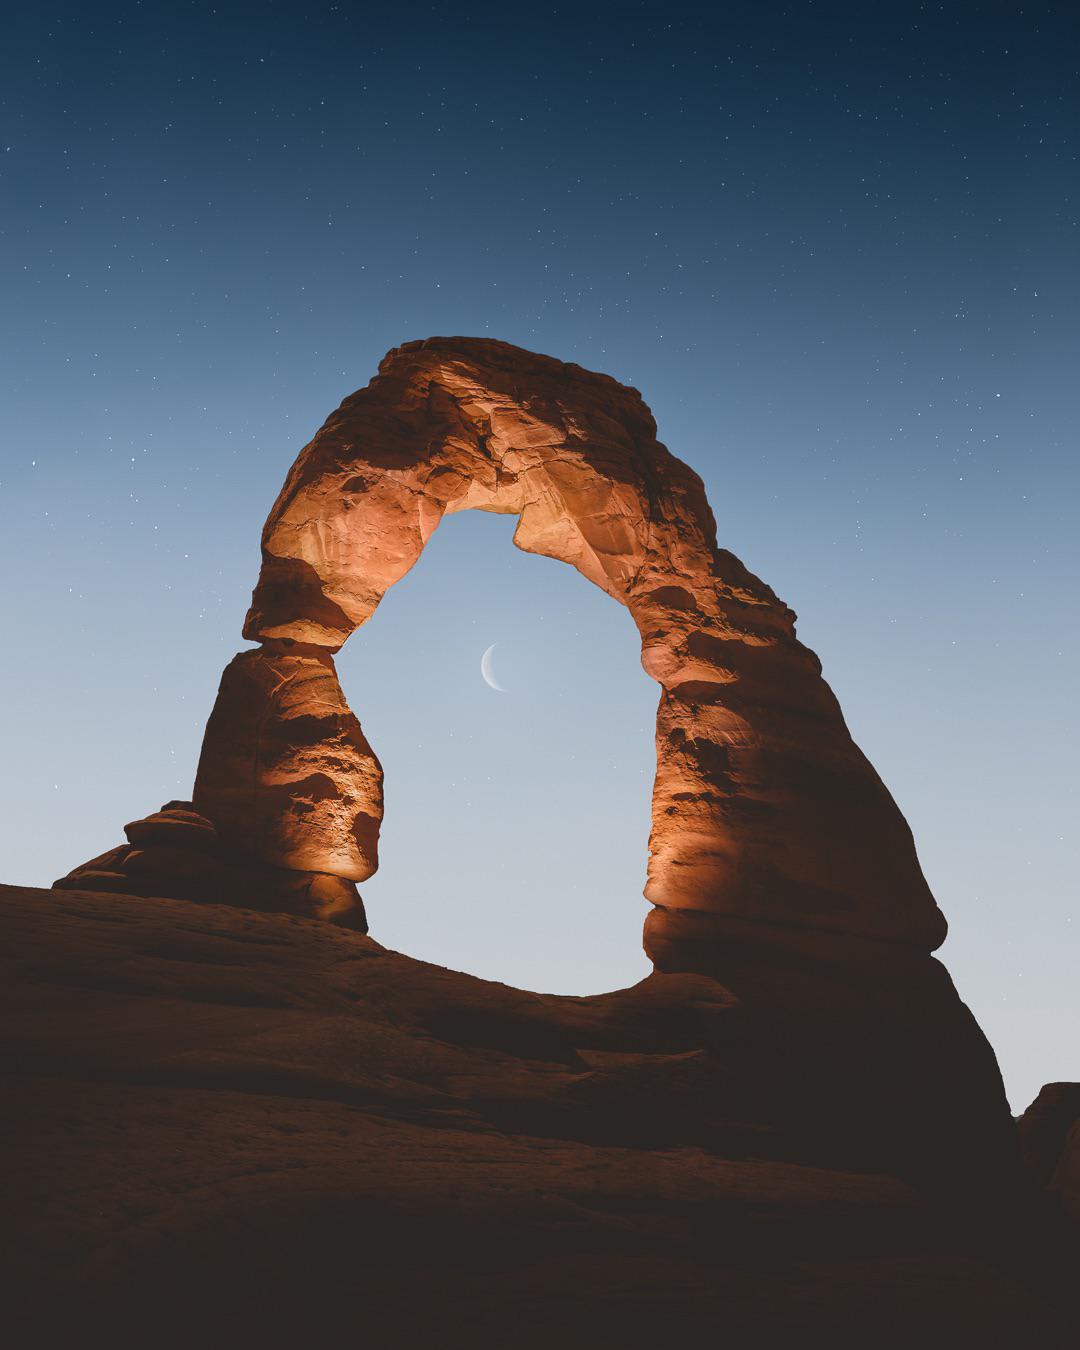 Delicate Arch - I know it’s been photographed to death but this was a project I wanted to complete for a couple years